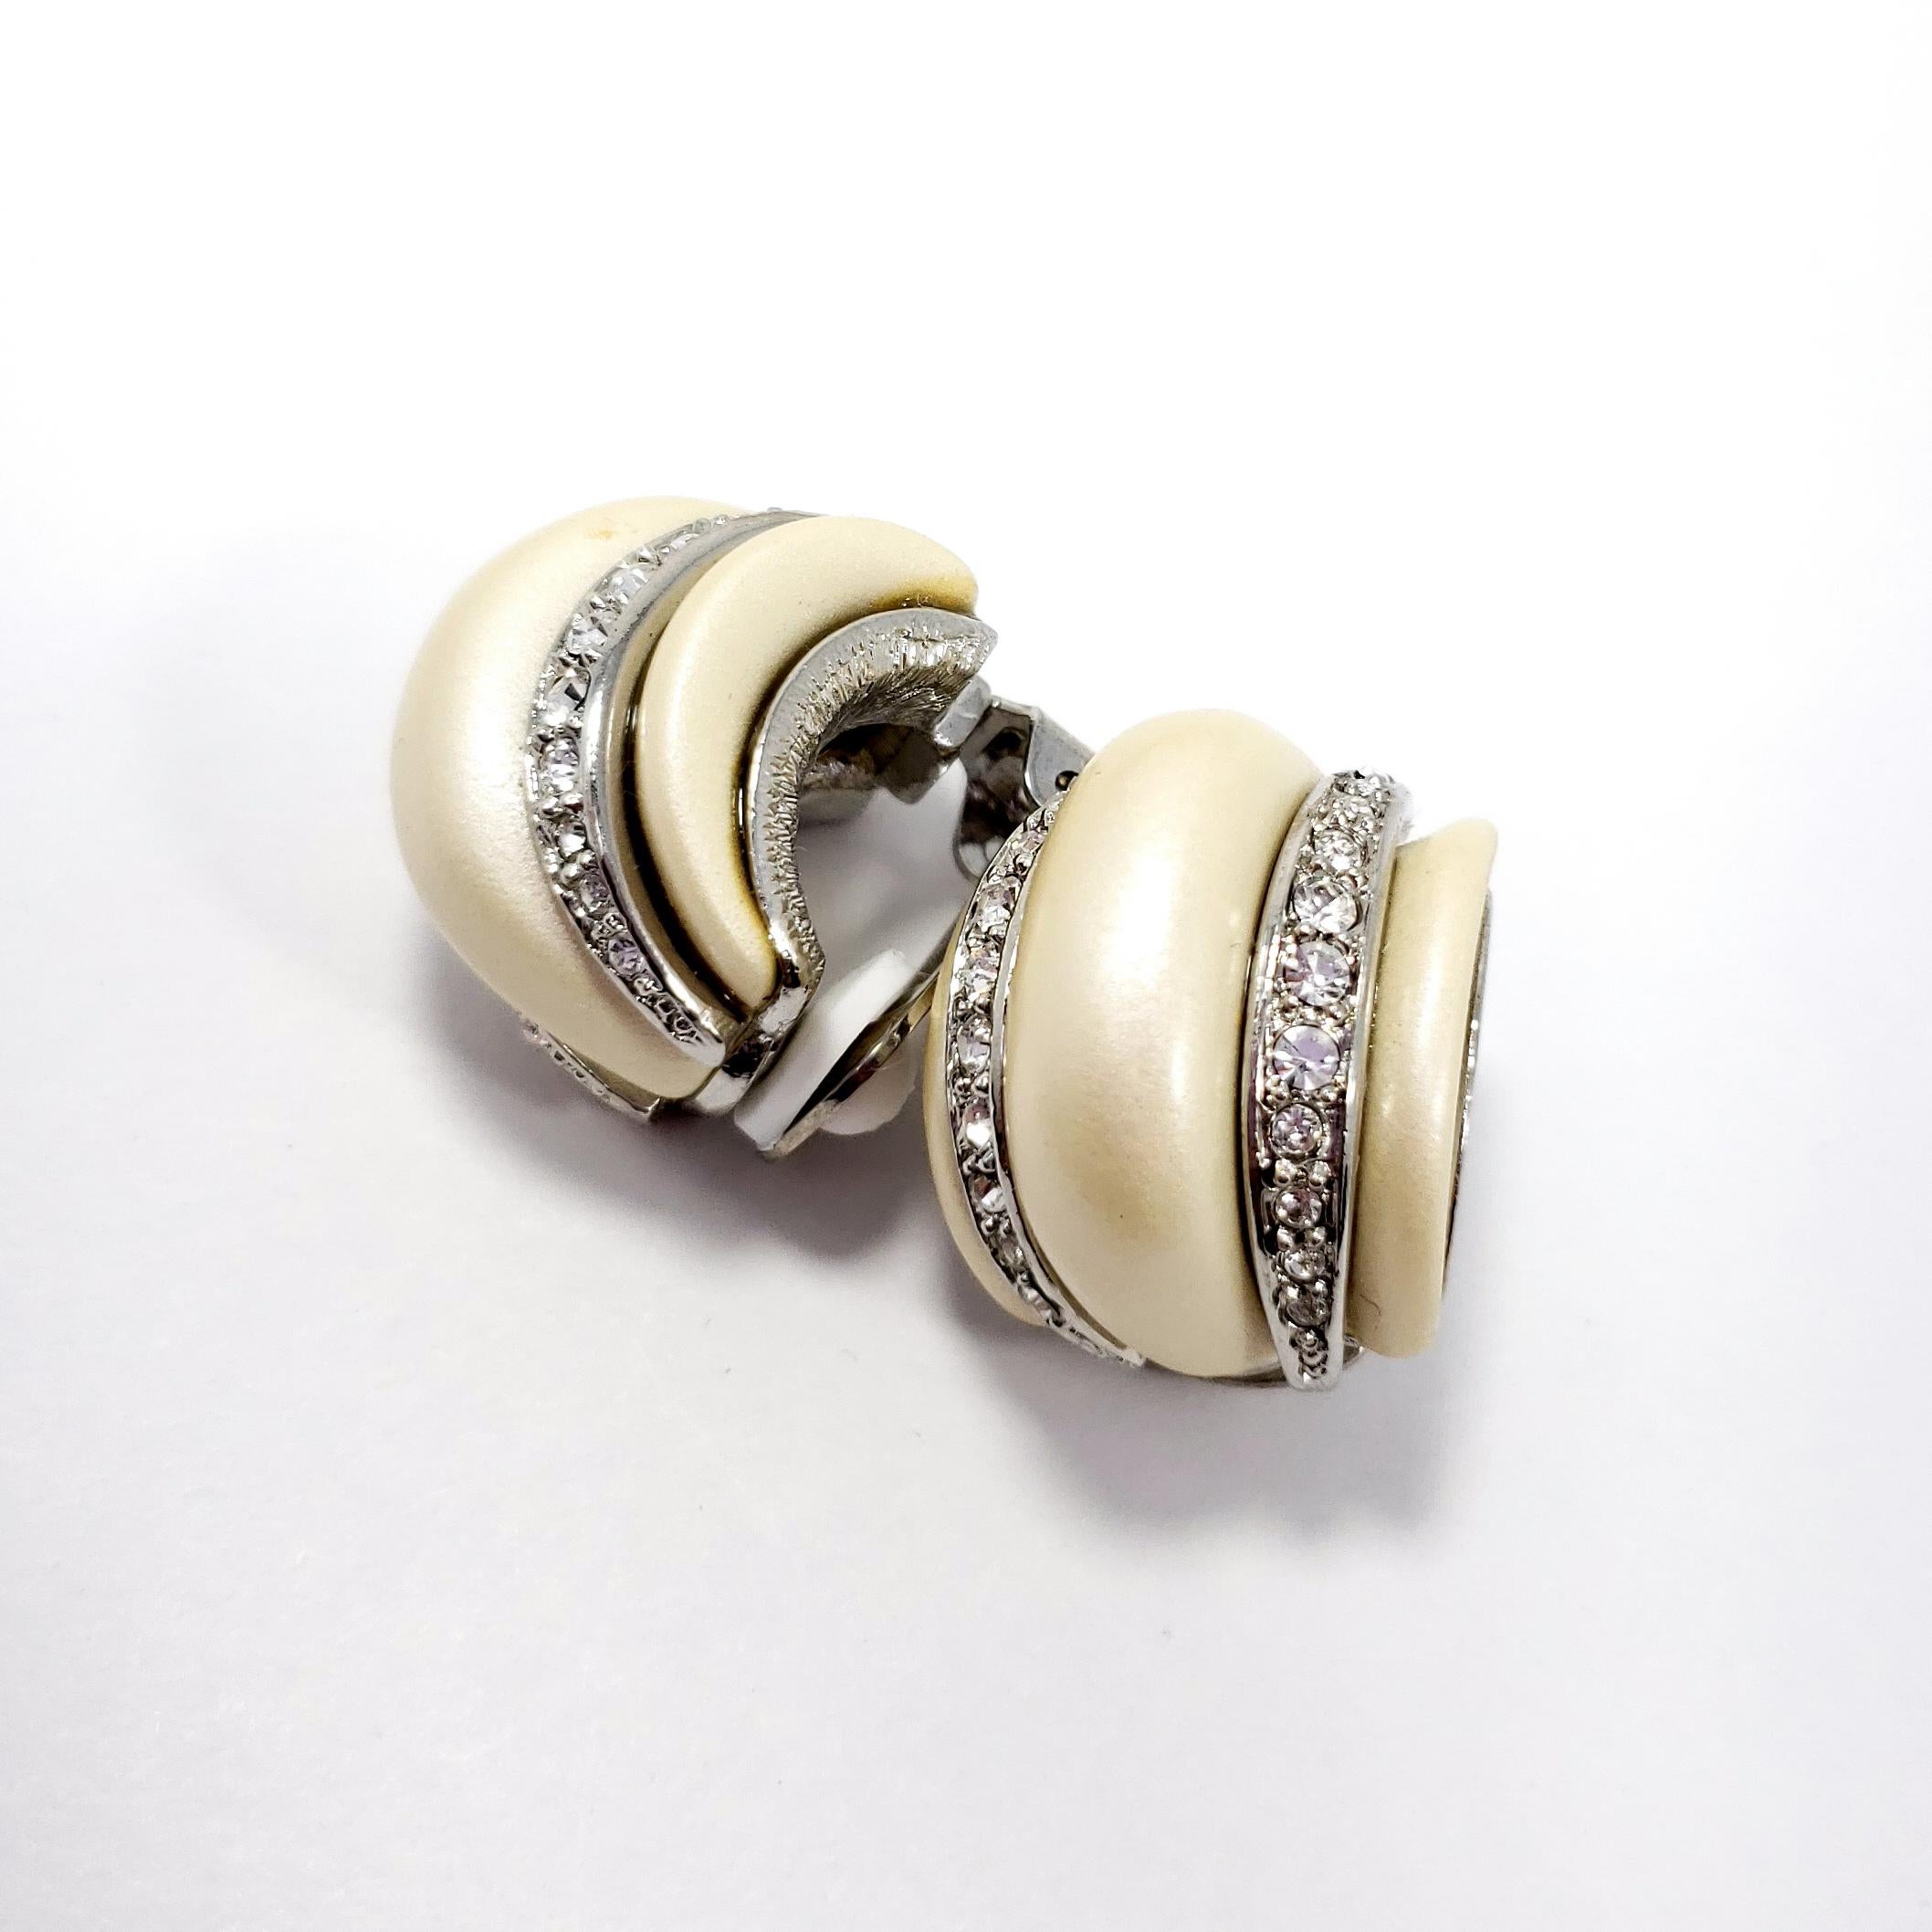 Stylish silver clip on earrings from Kenneth Jay Lane. Each earring features faux mother of pearl decorated with clear crystals. 

Hallmarks: KJL